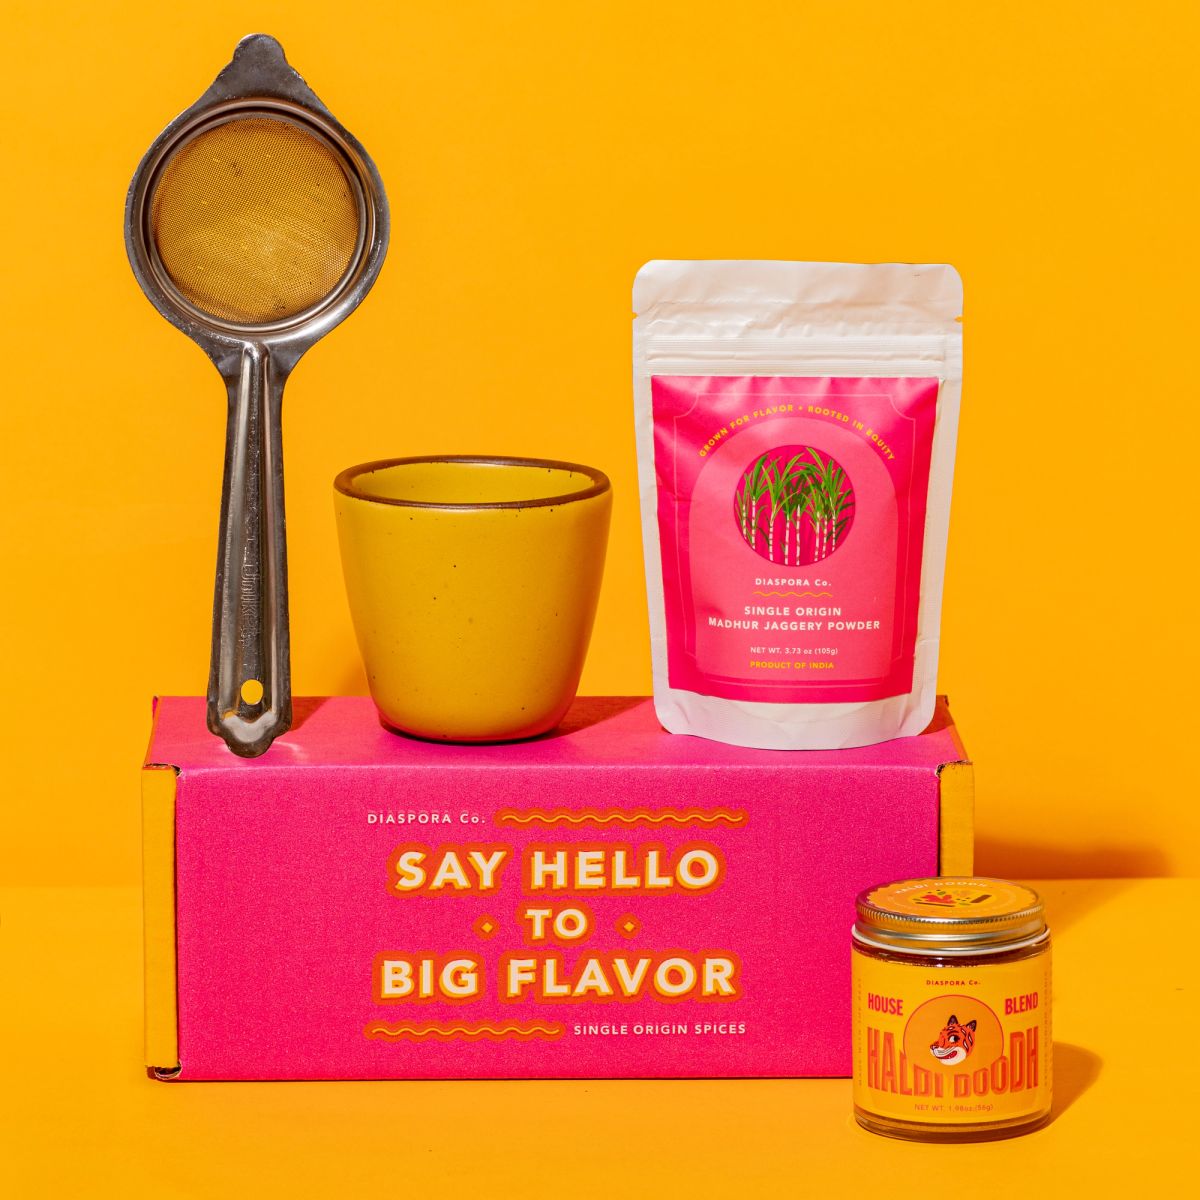 Pink box with a yellow Kulhad, strainer and tea on top. Image is set on a yellow background with a jar of haldi doodh in front of the pink box.